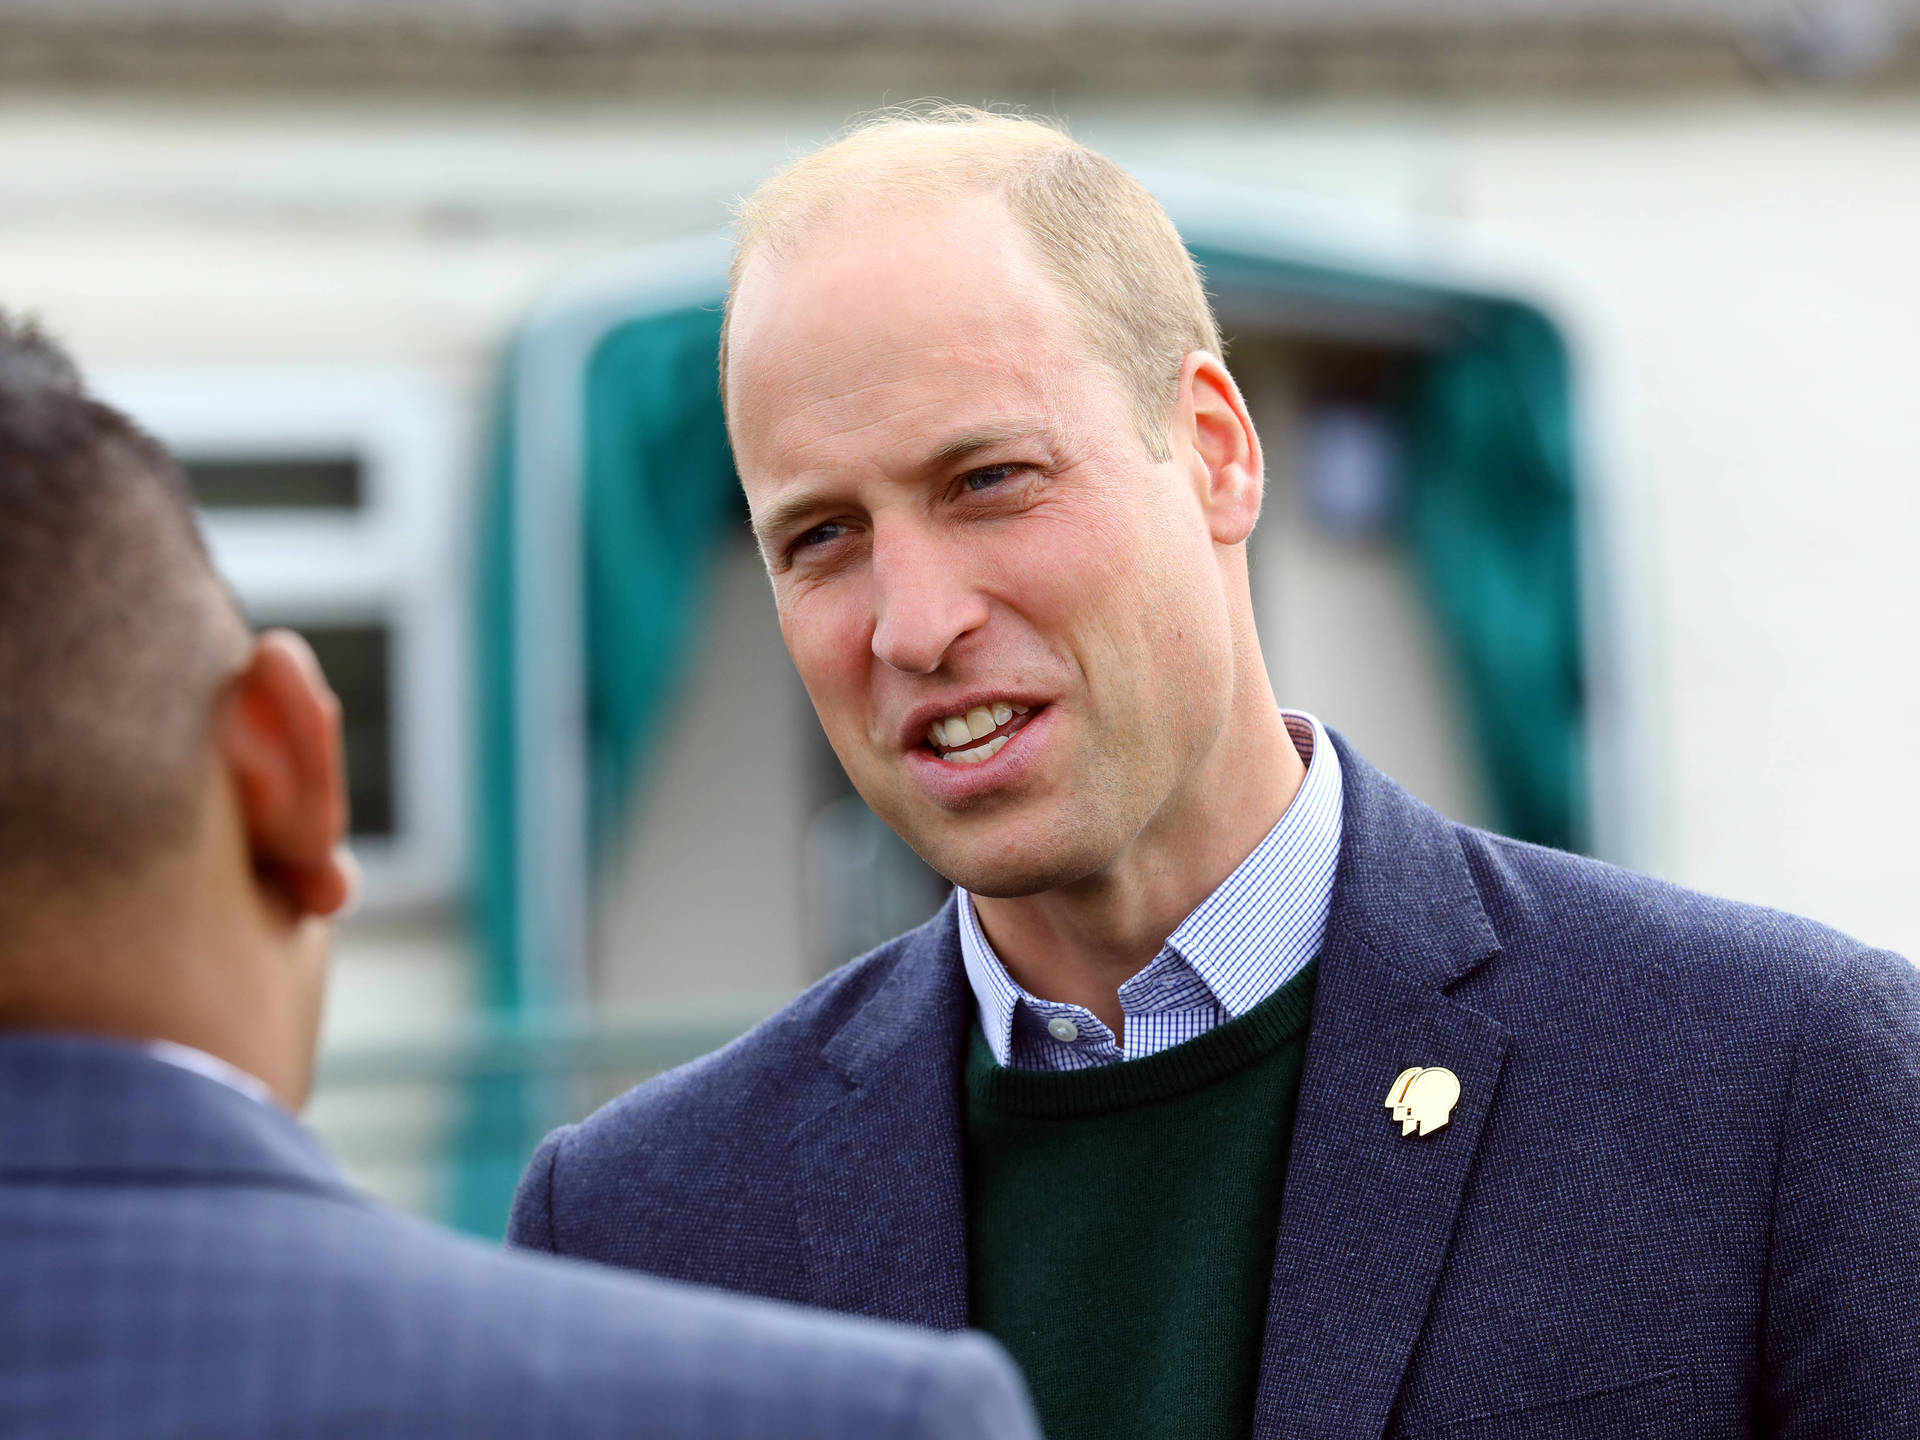 Prince William Conversing With Someone